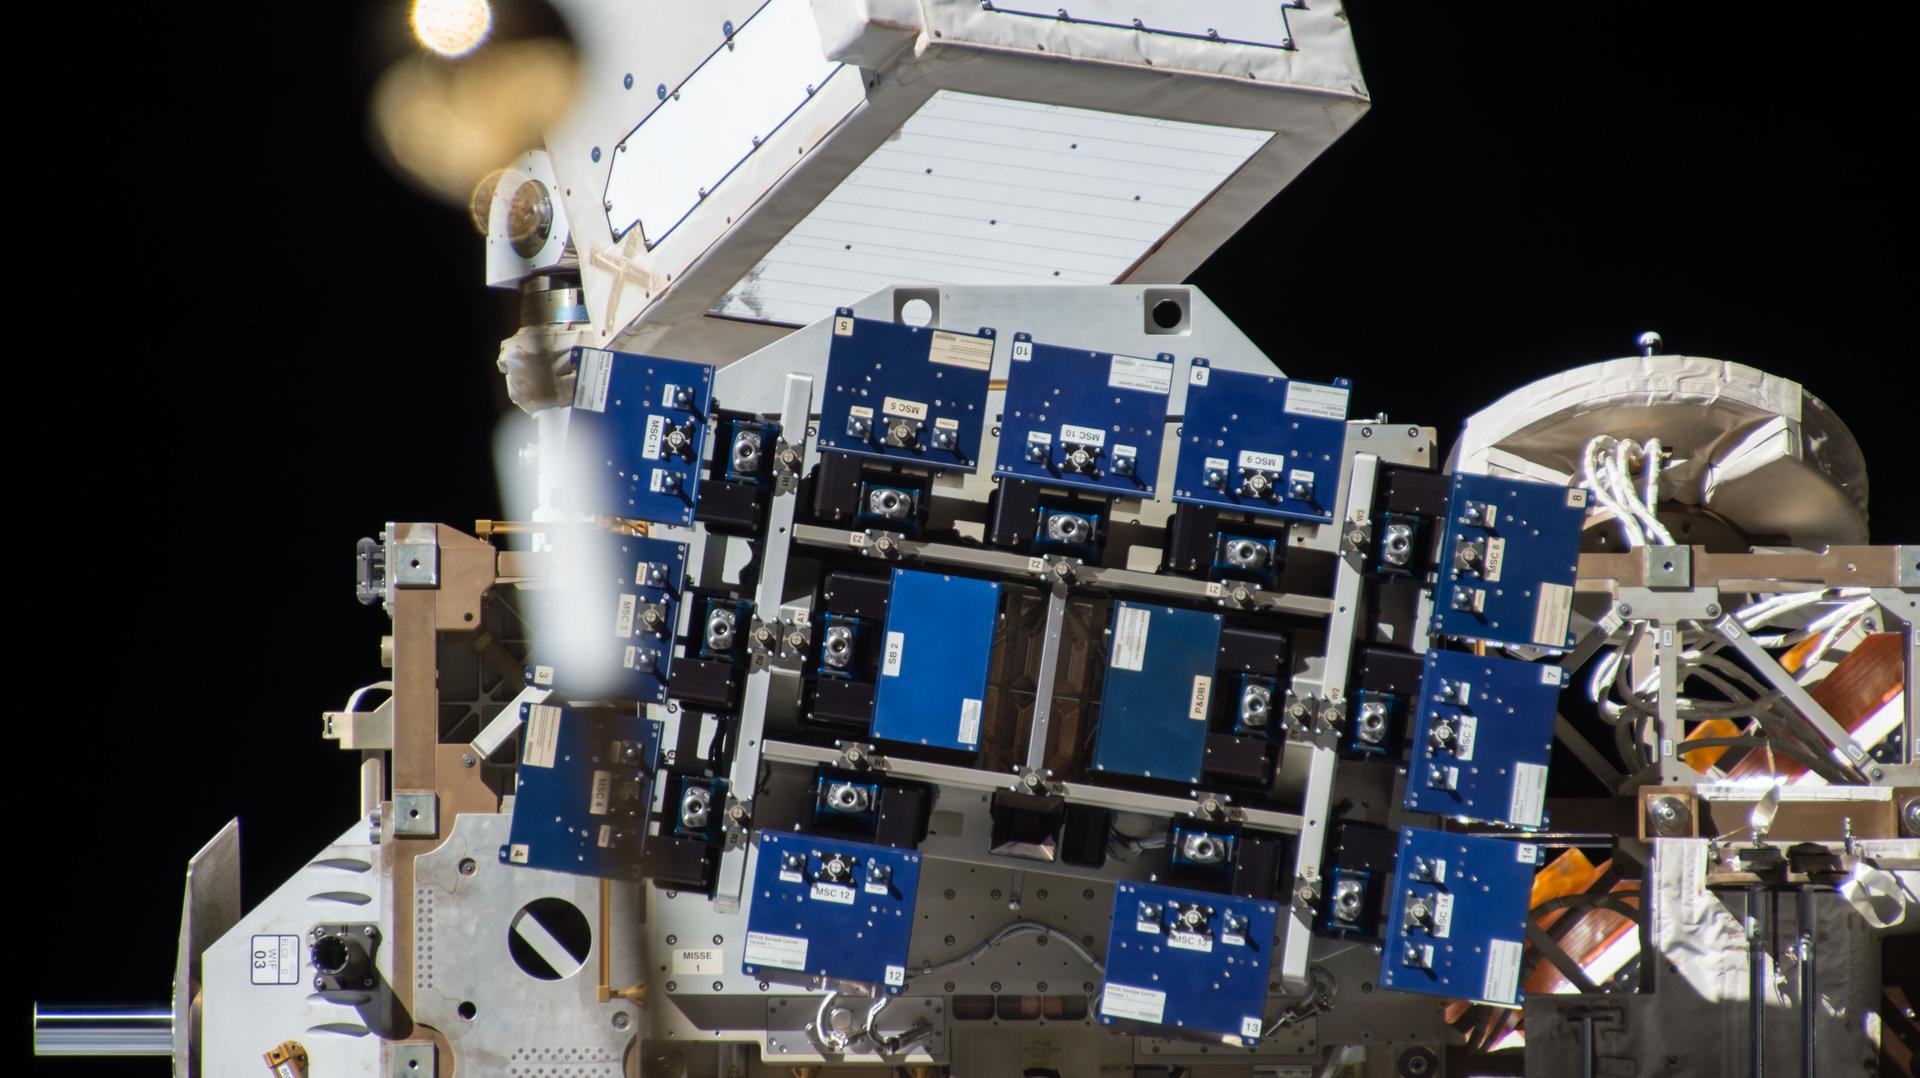 The MISSE-FF is visible in the image center, blue and black panels on a large white structure. The station’s robotic arm extends from the top of the image and solar panels fill the background with the blackness of space behind them.